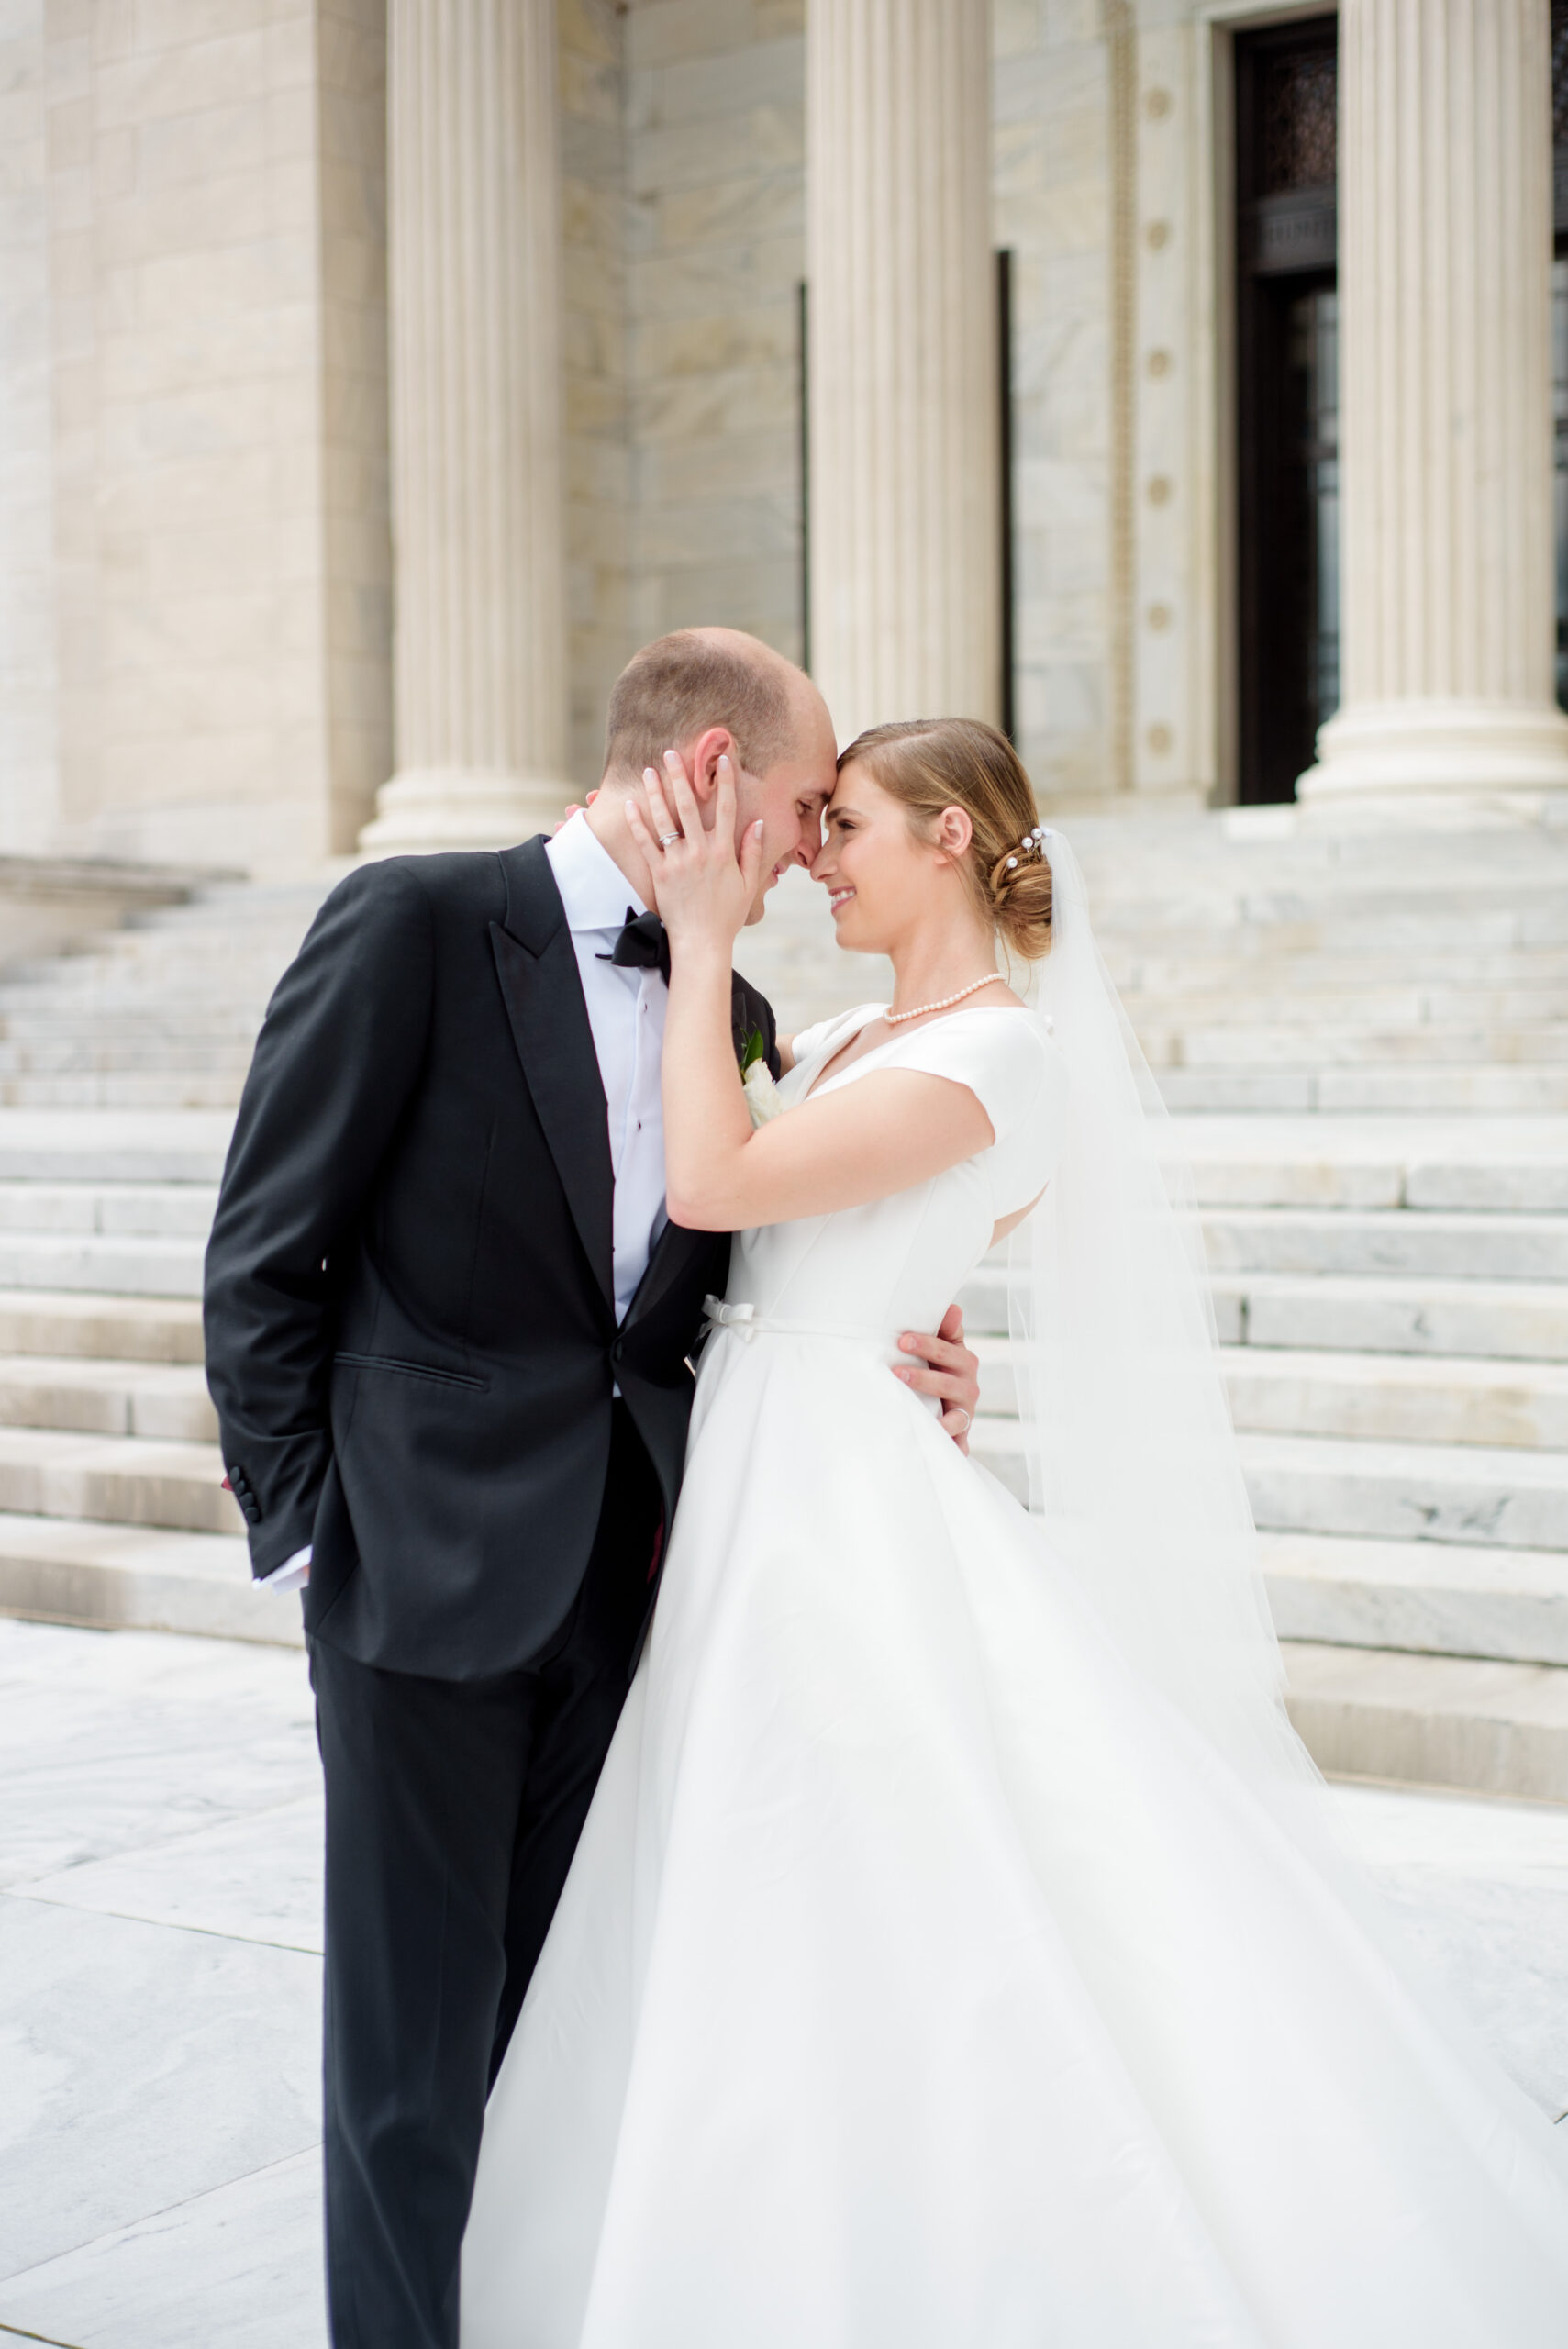 A bride and groom are embracing in front of the stairs at the Cleveland Museum of Art.